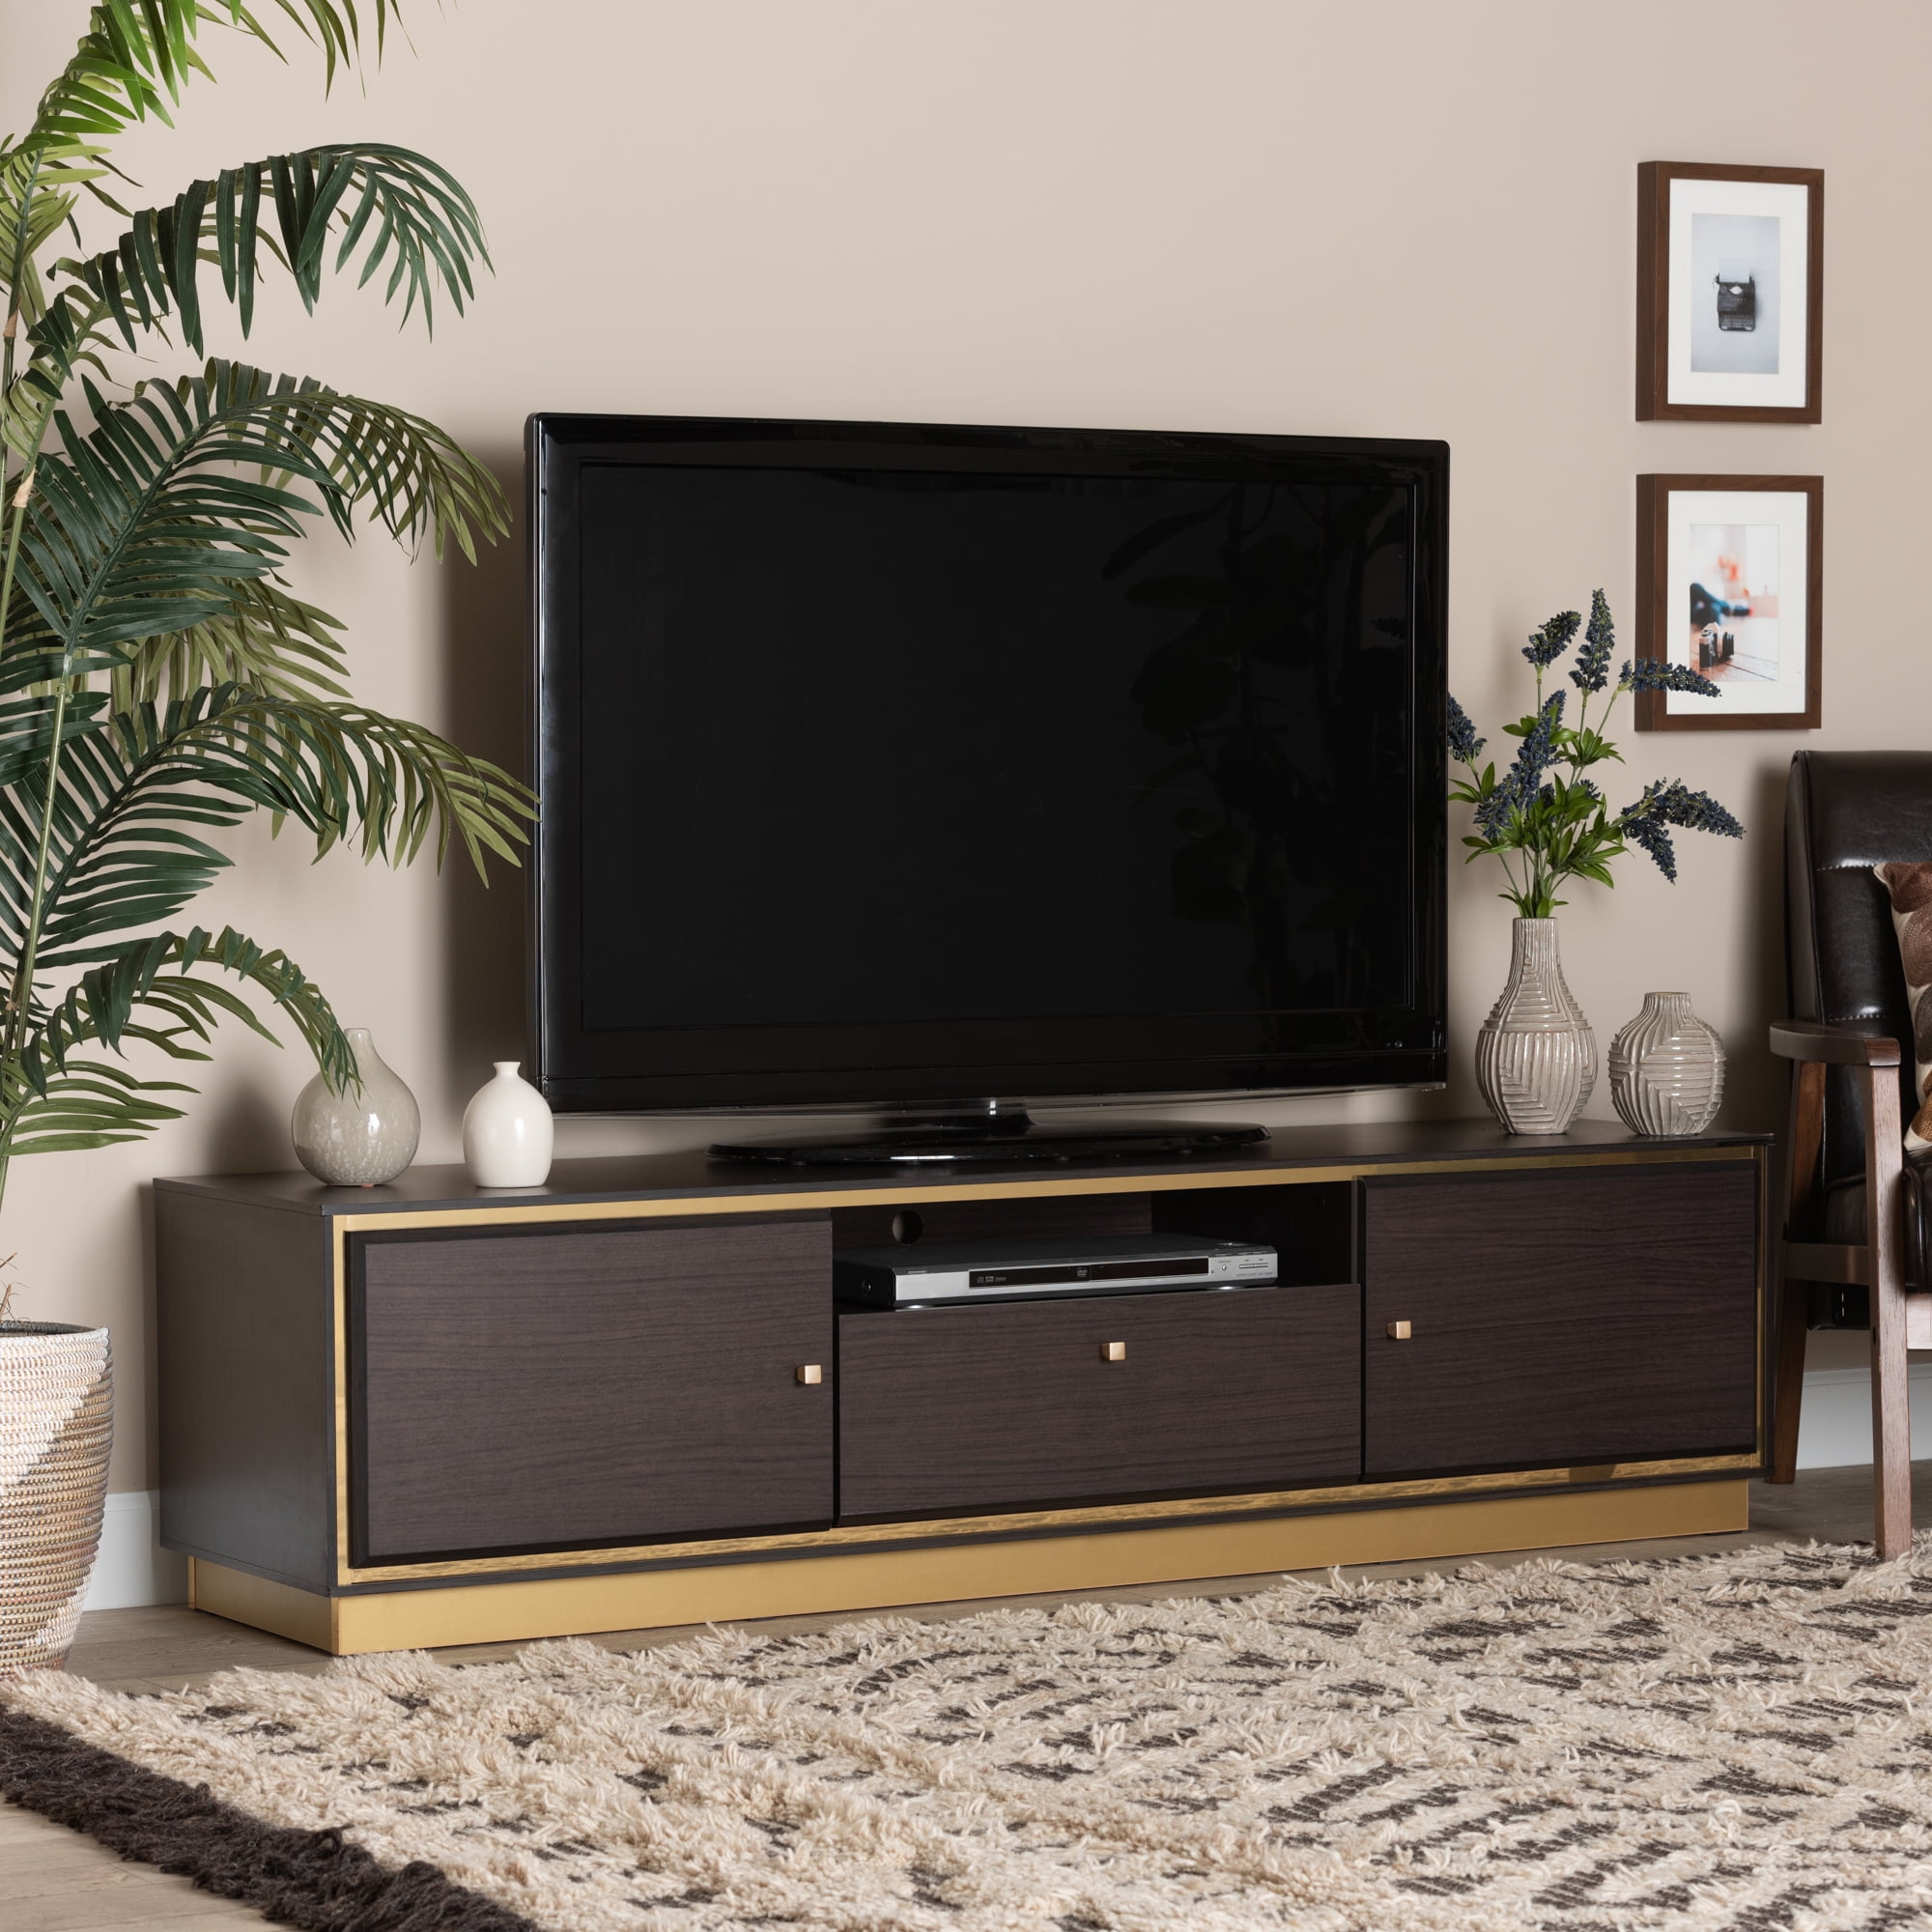 Oak/Black Decorotika Omar 160 cm Wide TV Stand and Media Console for TVs up to 72'' with Colour Options 